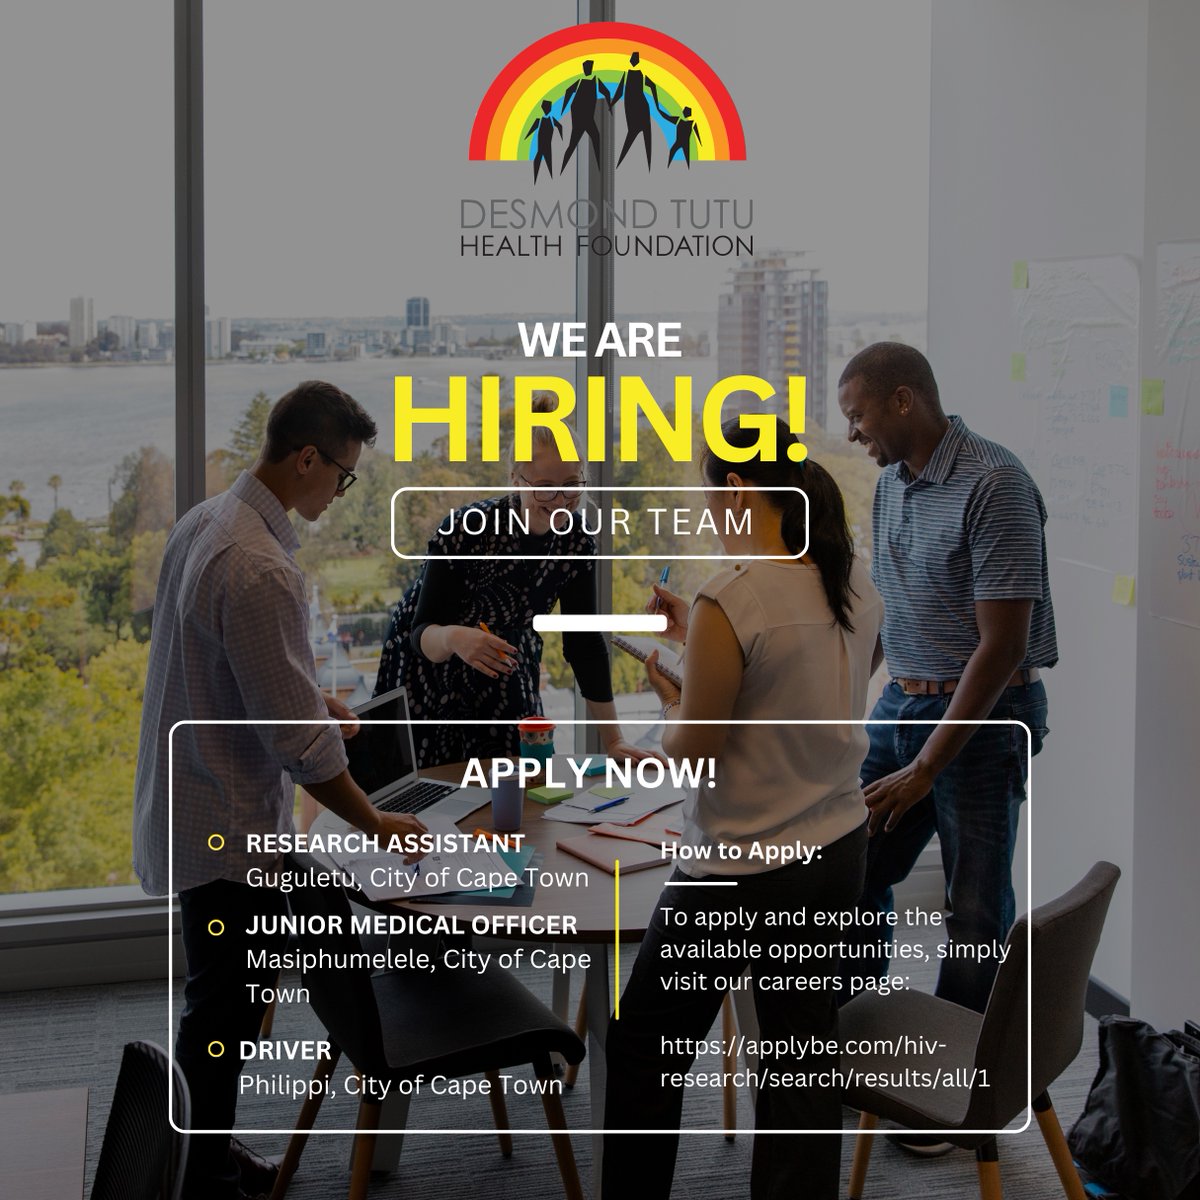 Exciting Career Opportunities Available @DTHF_SA ! 🌈🌍 If you're ready to embark on a rewarding journey we invite you to explore these opportunities with us. To apply and discover more about the available positions, simply visit our careers page at applybe.com/hiv-research/s…